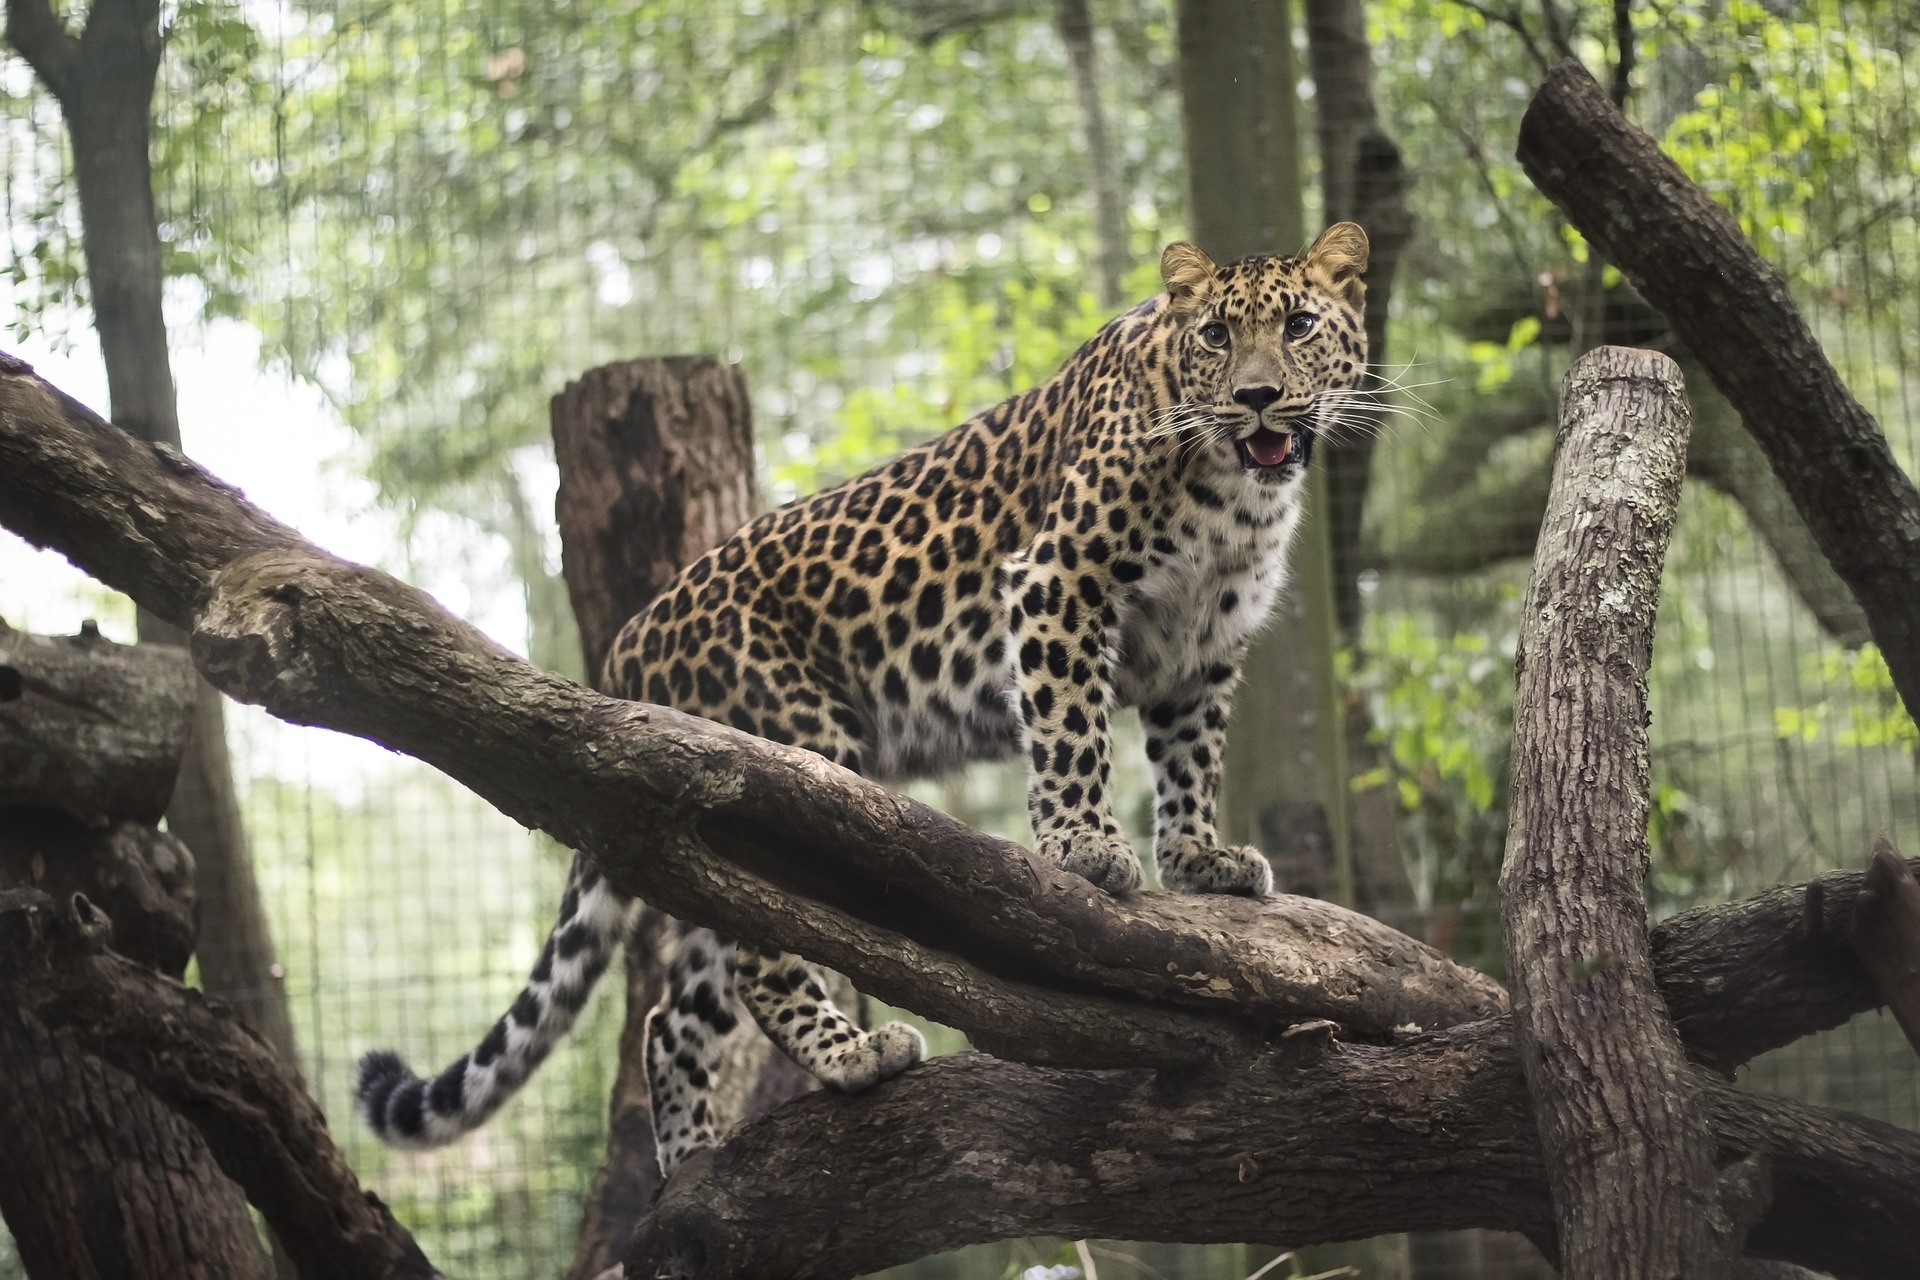 Go Wild at the Jacksonville Zoo